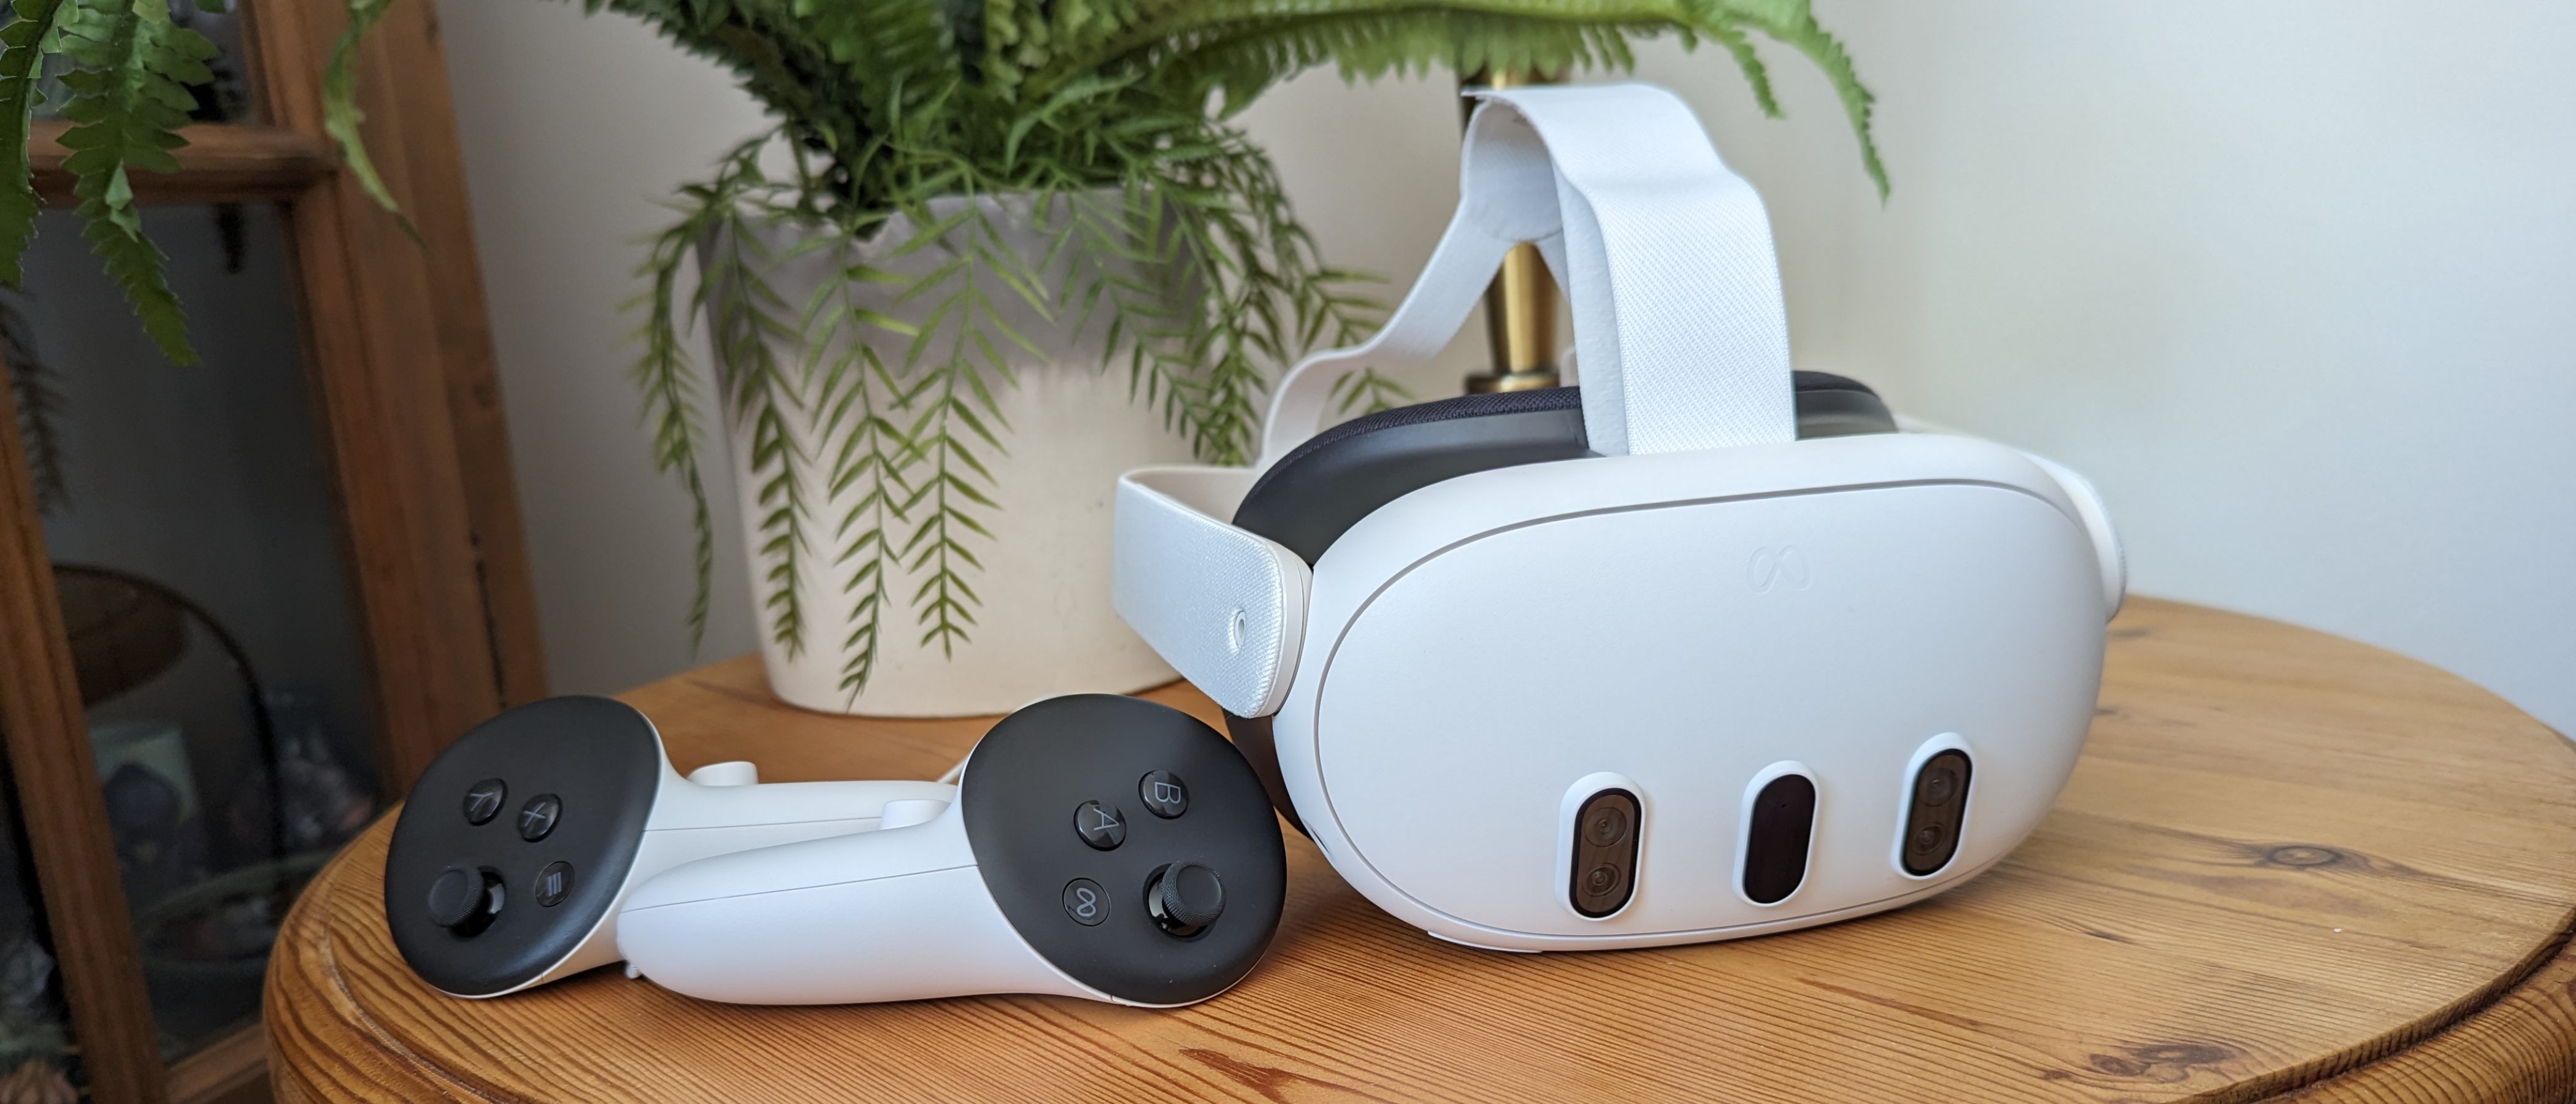 Best VR headsets for PC 2020: Reviews and comparisons